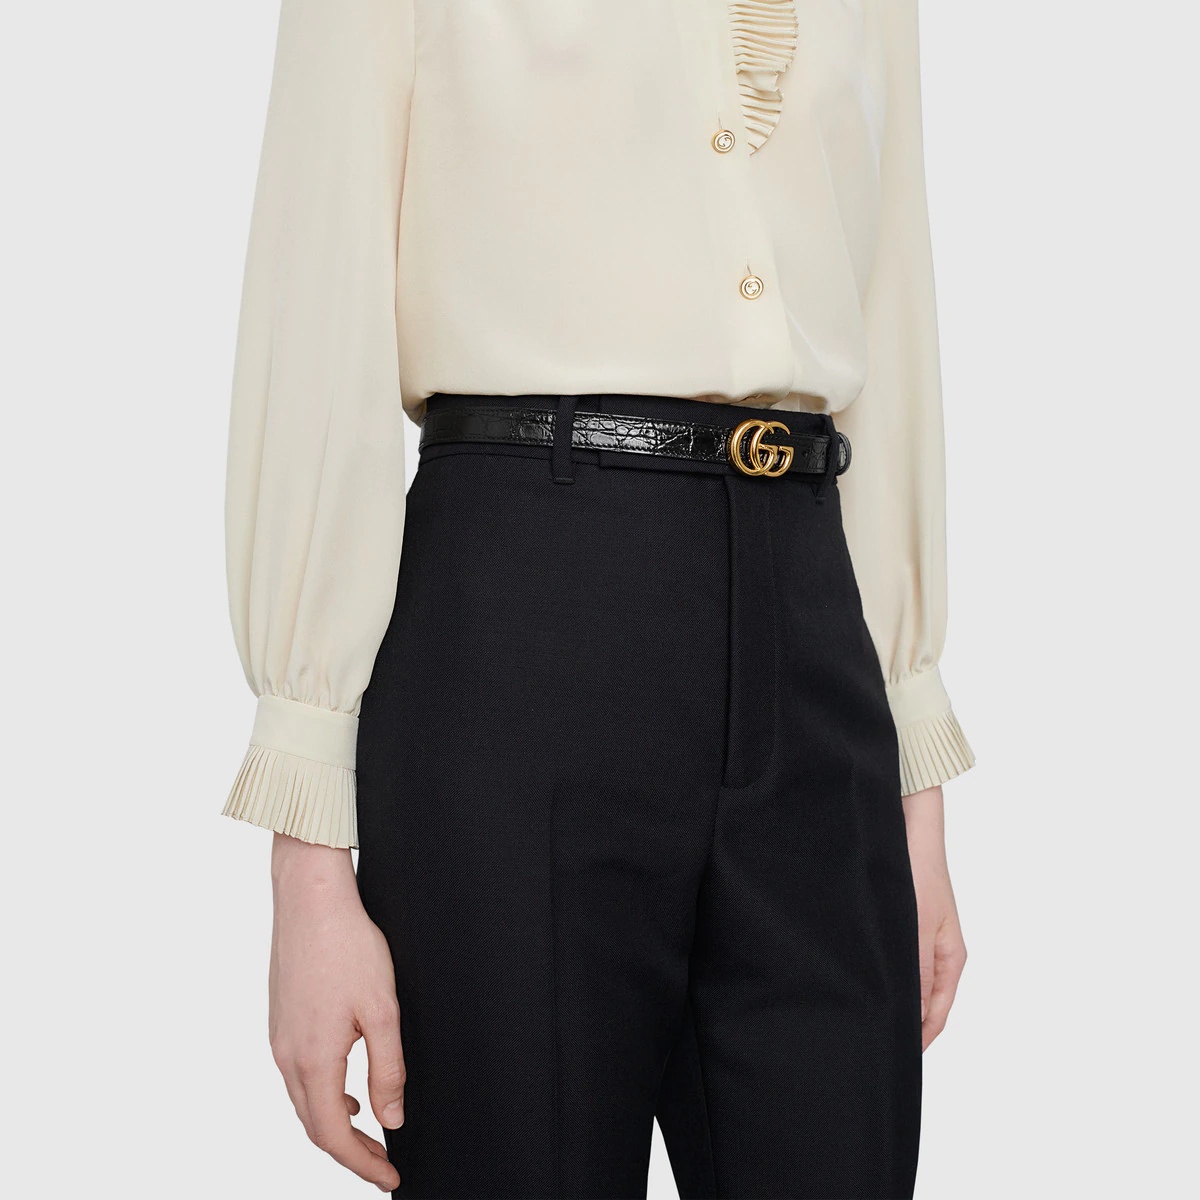 GG Marmont thin caiman belt with shiny buckle - 4